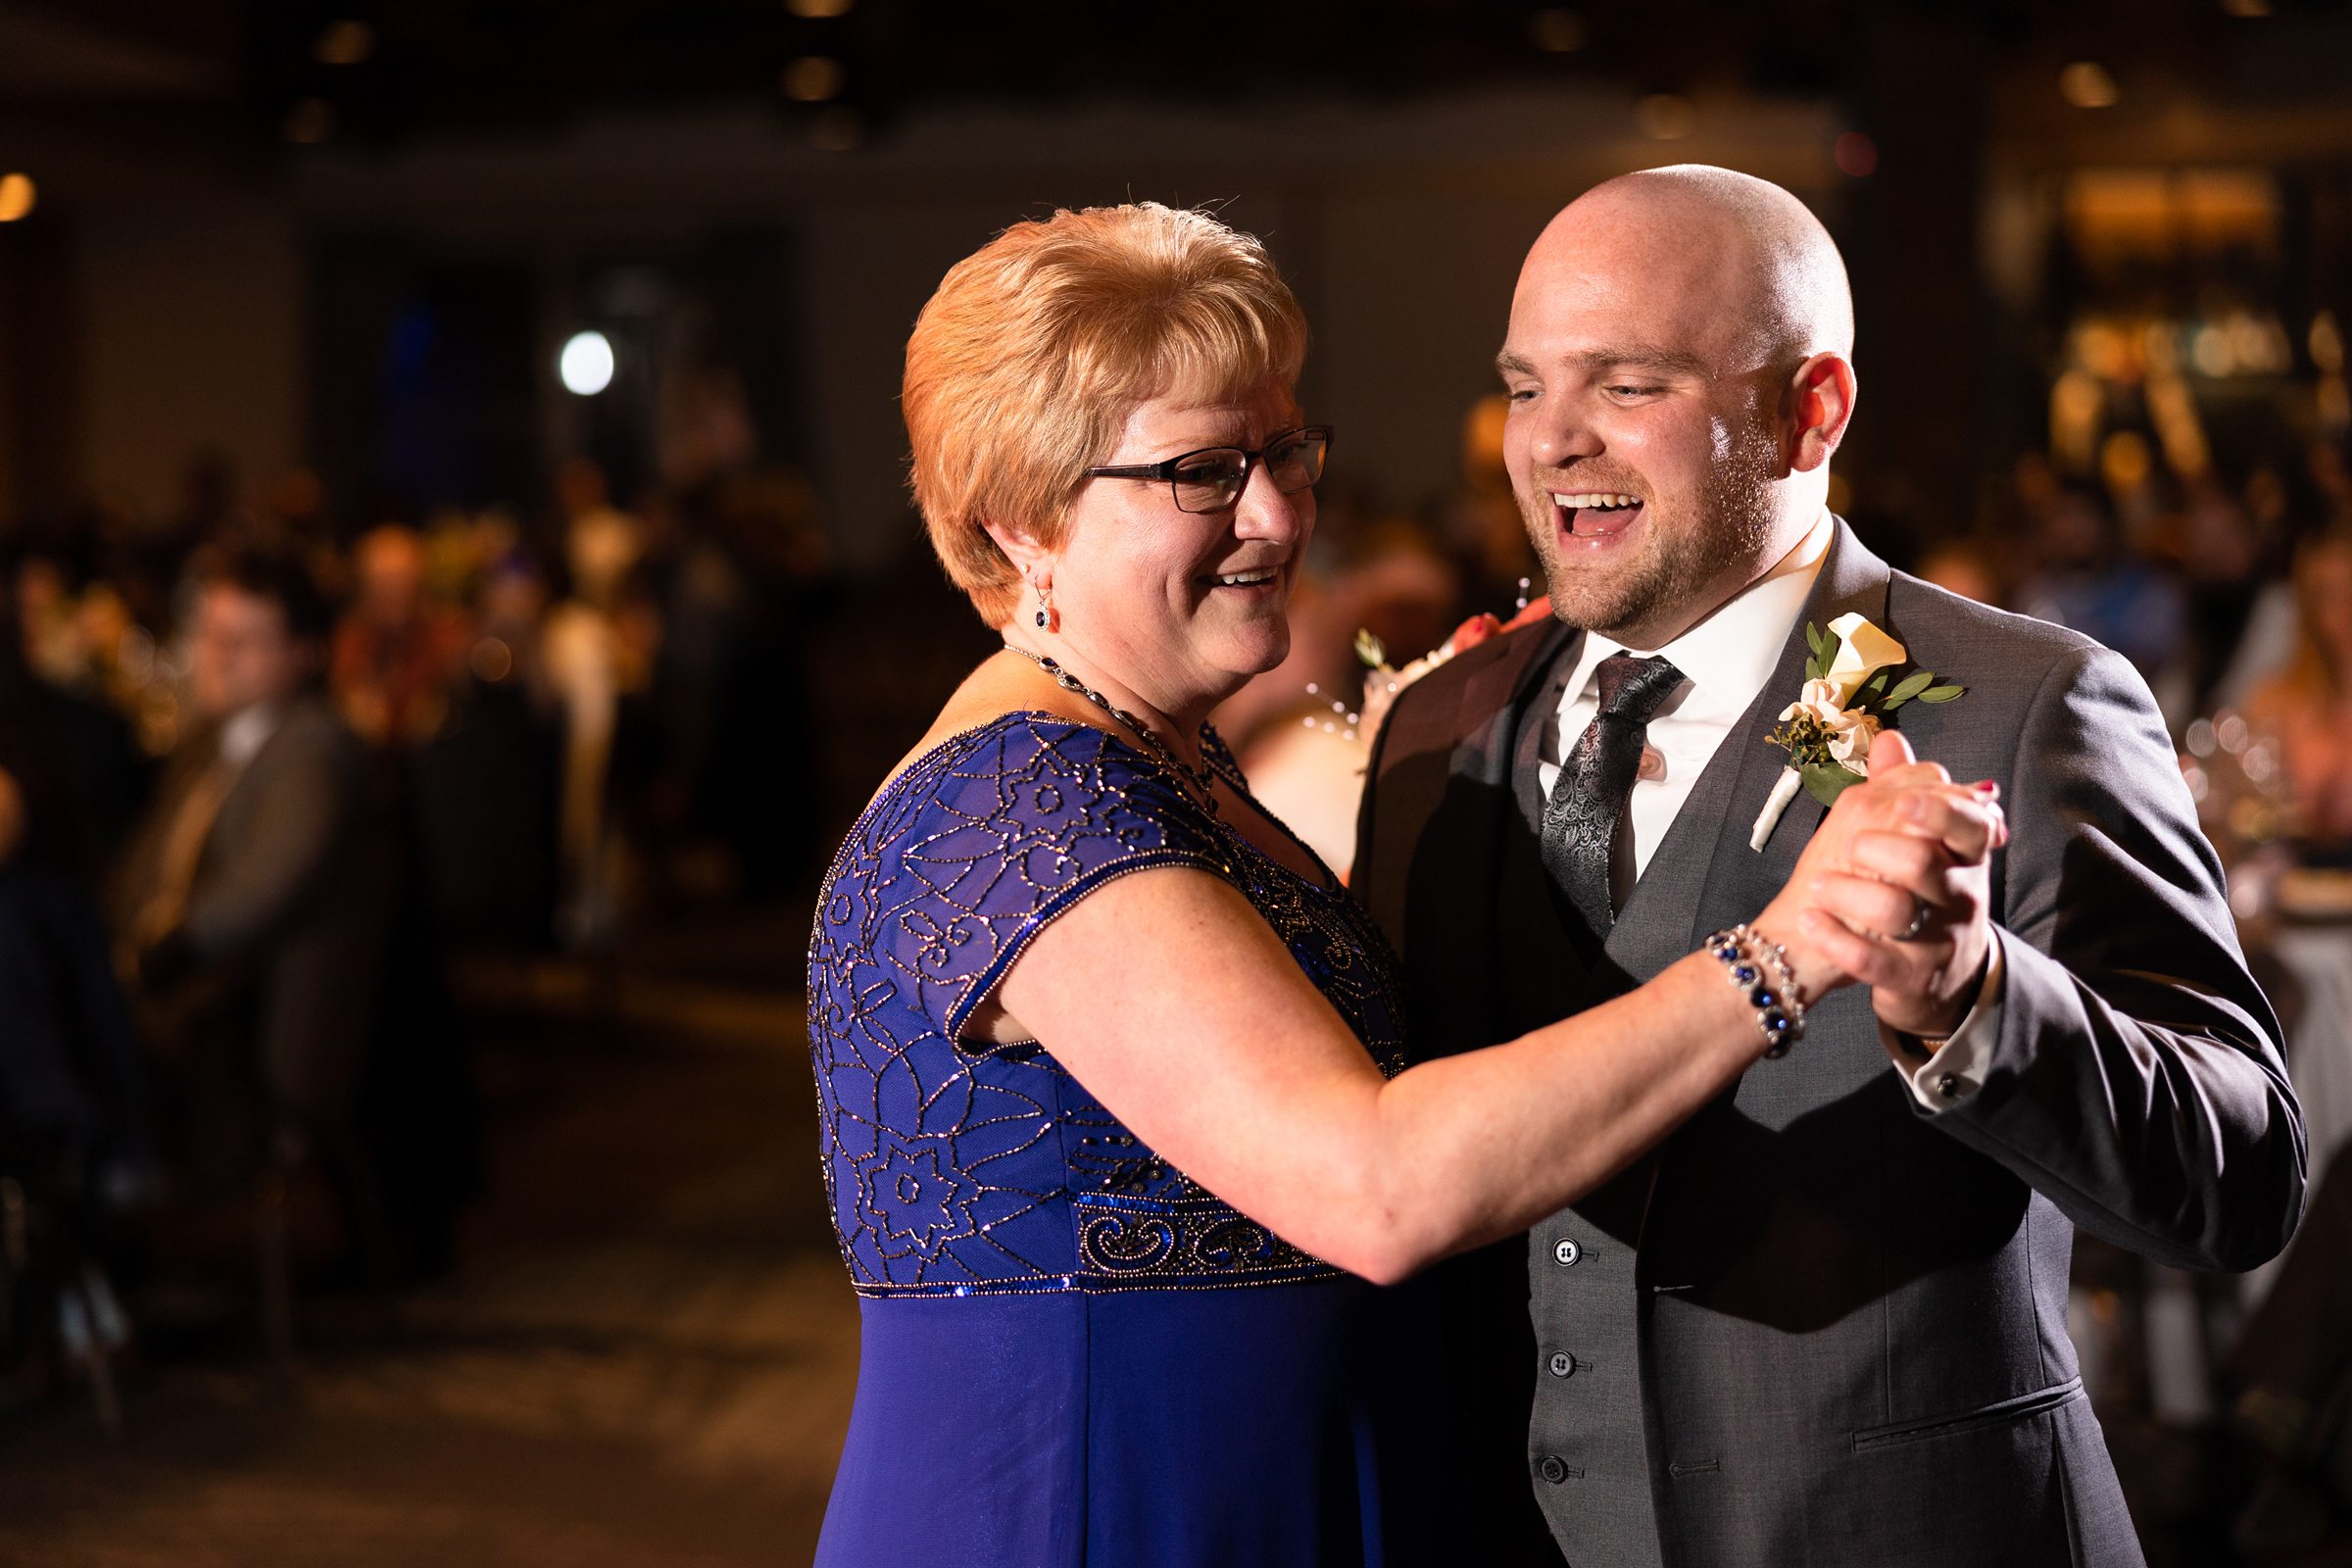 Groom dances with his mother at a wedding in Naperville, Illinois. Photo Taken by Austin Wedding Photographers, Joanna & Brett Photography